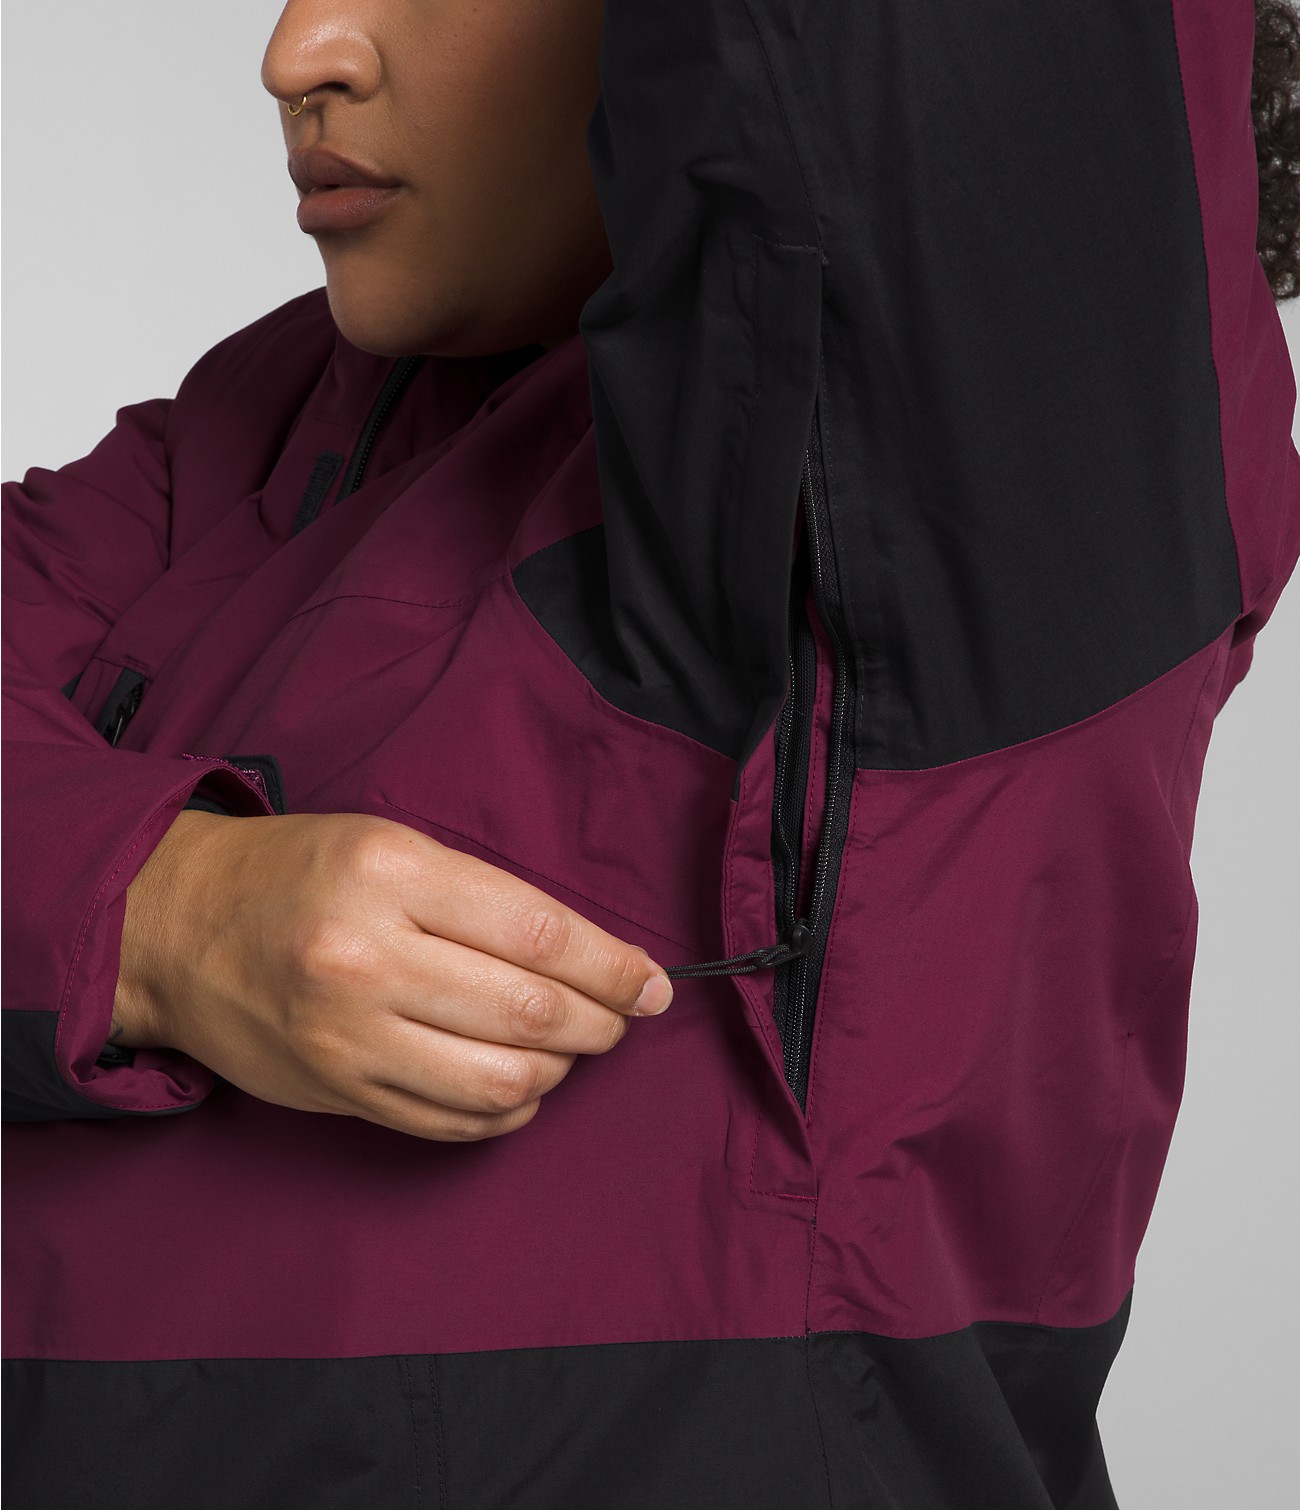 Women’s Plus Freedom Insulated Jacket | The North Face